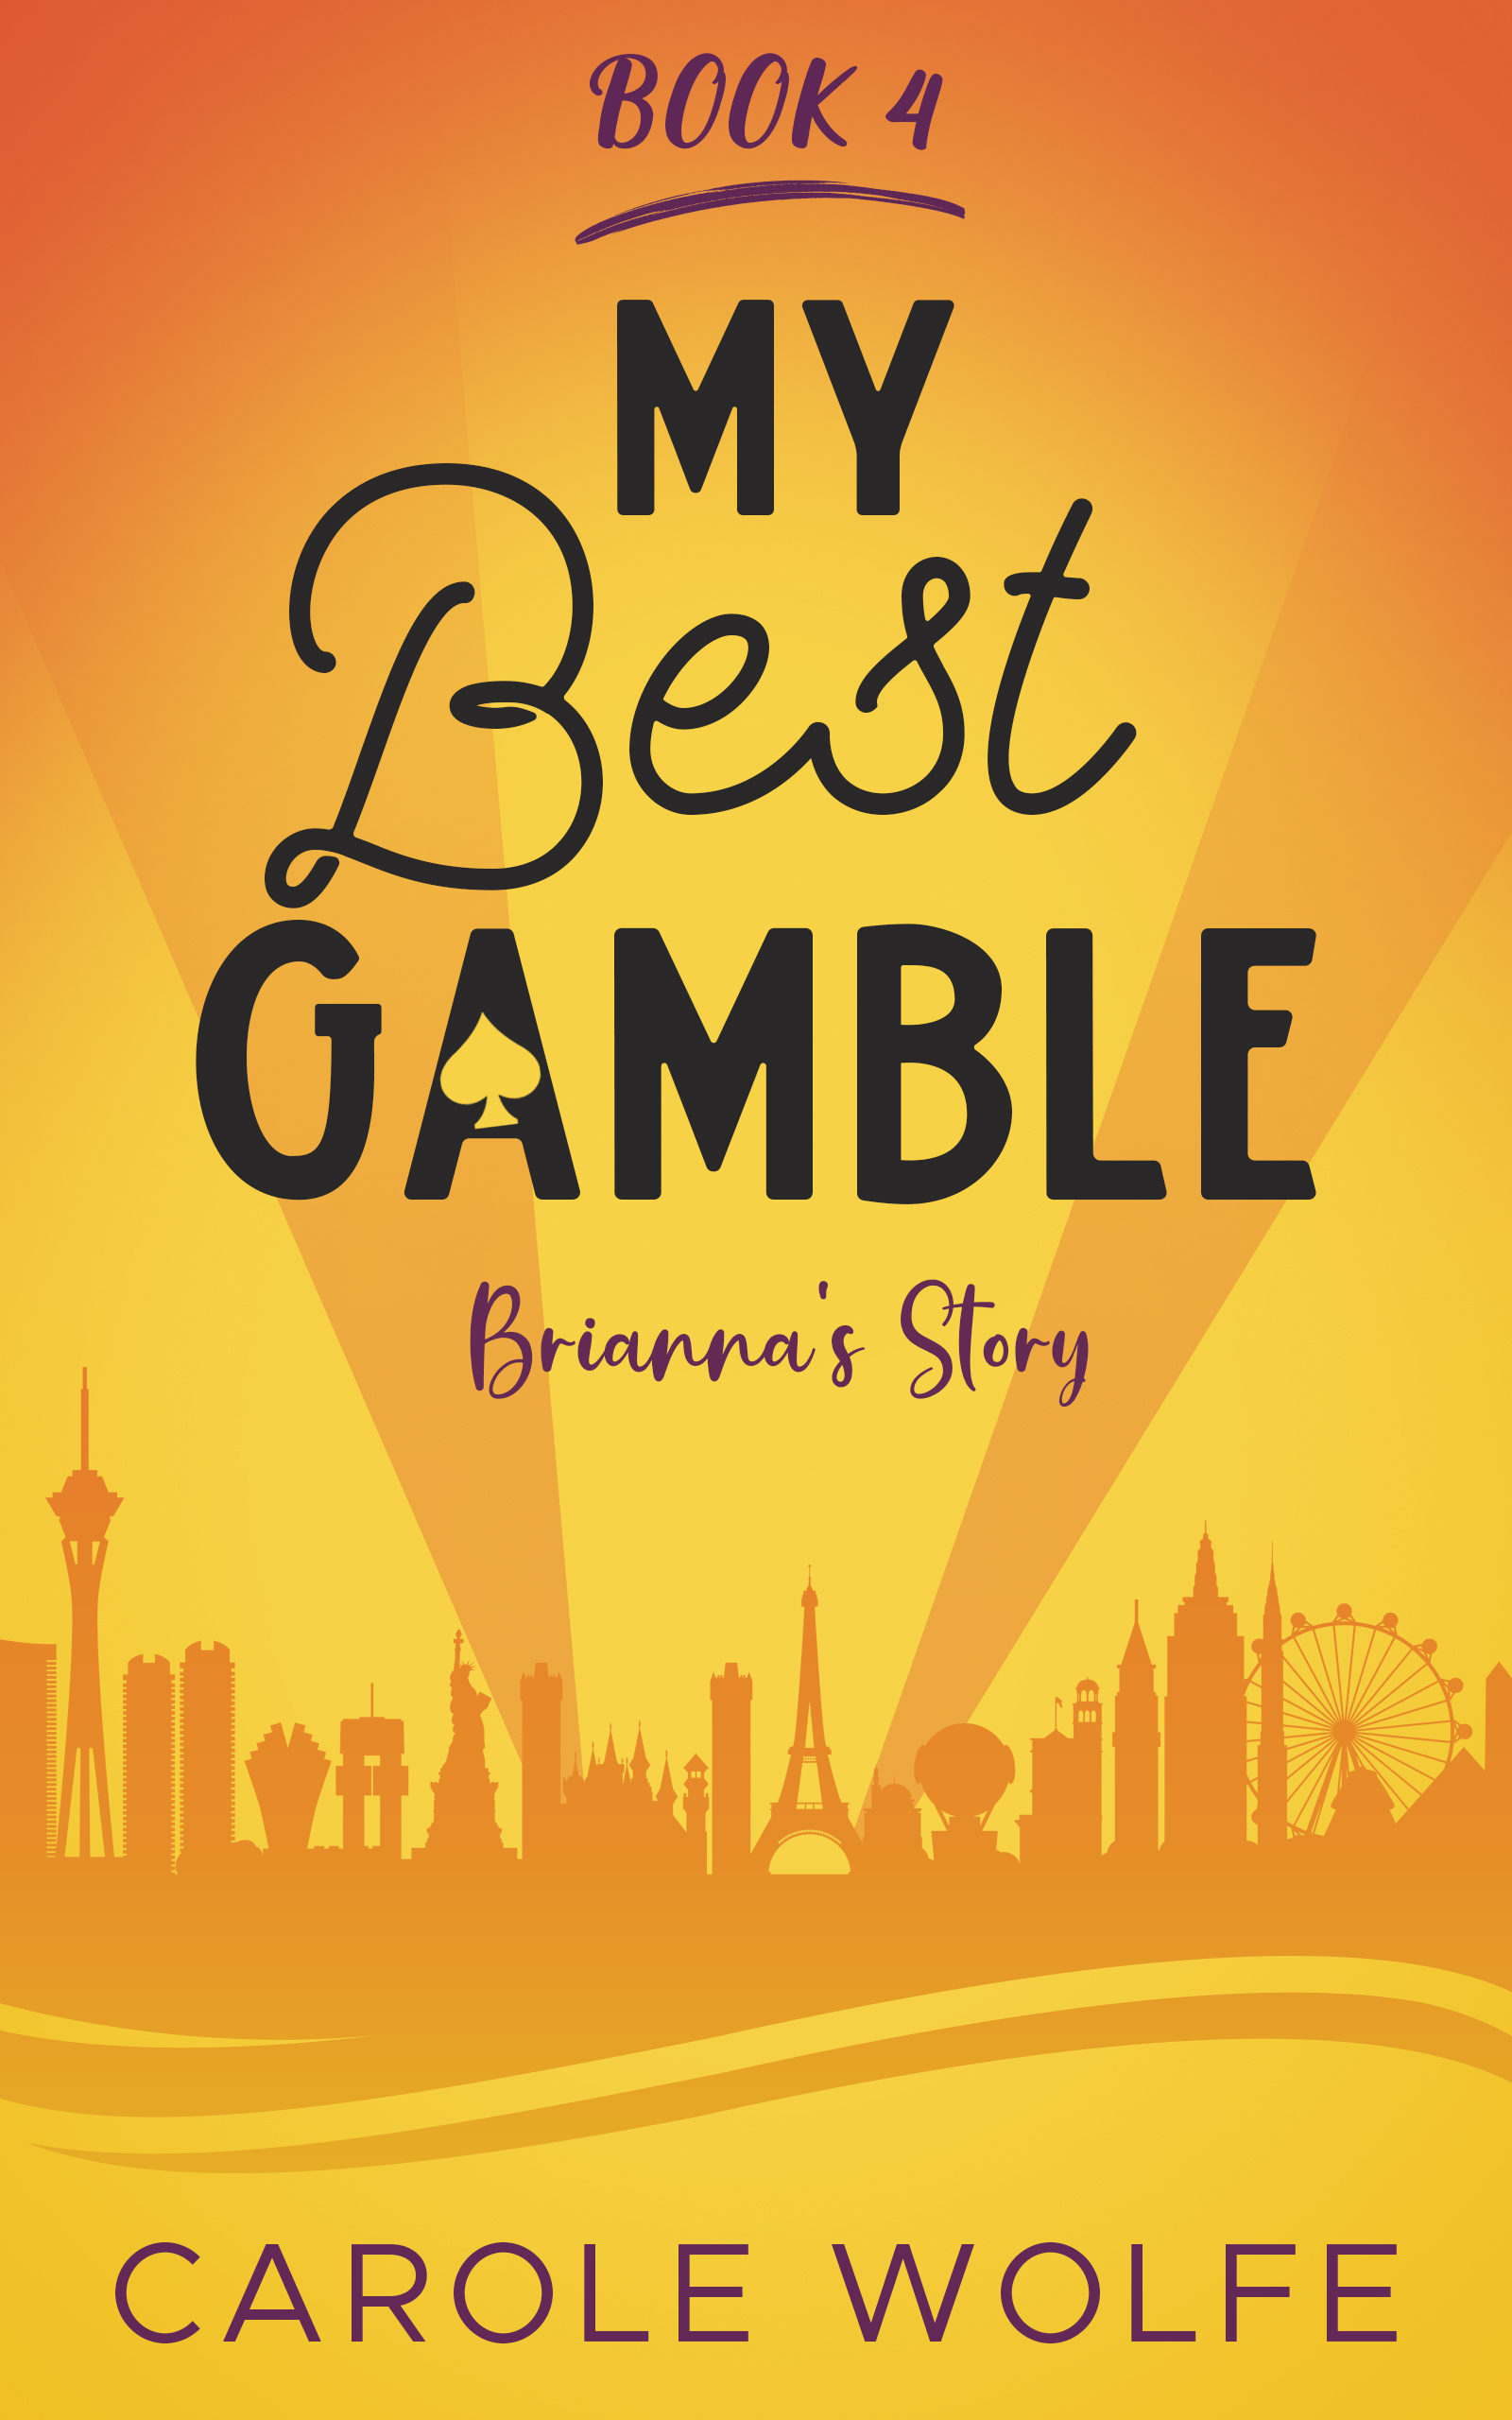 Cover of My Best Gamble - Brianna's Story. Book 4 in the My Best Series.